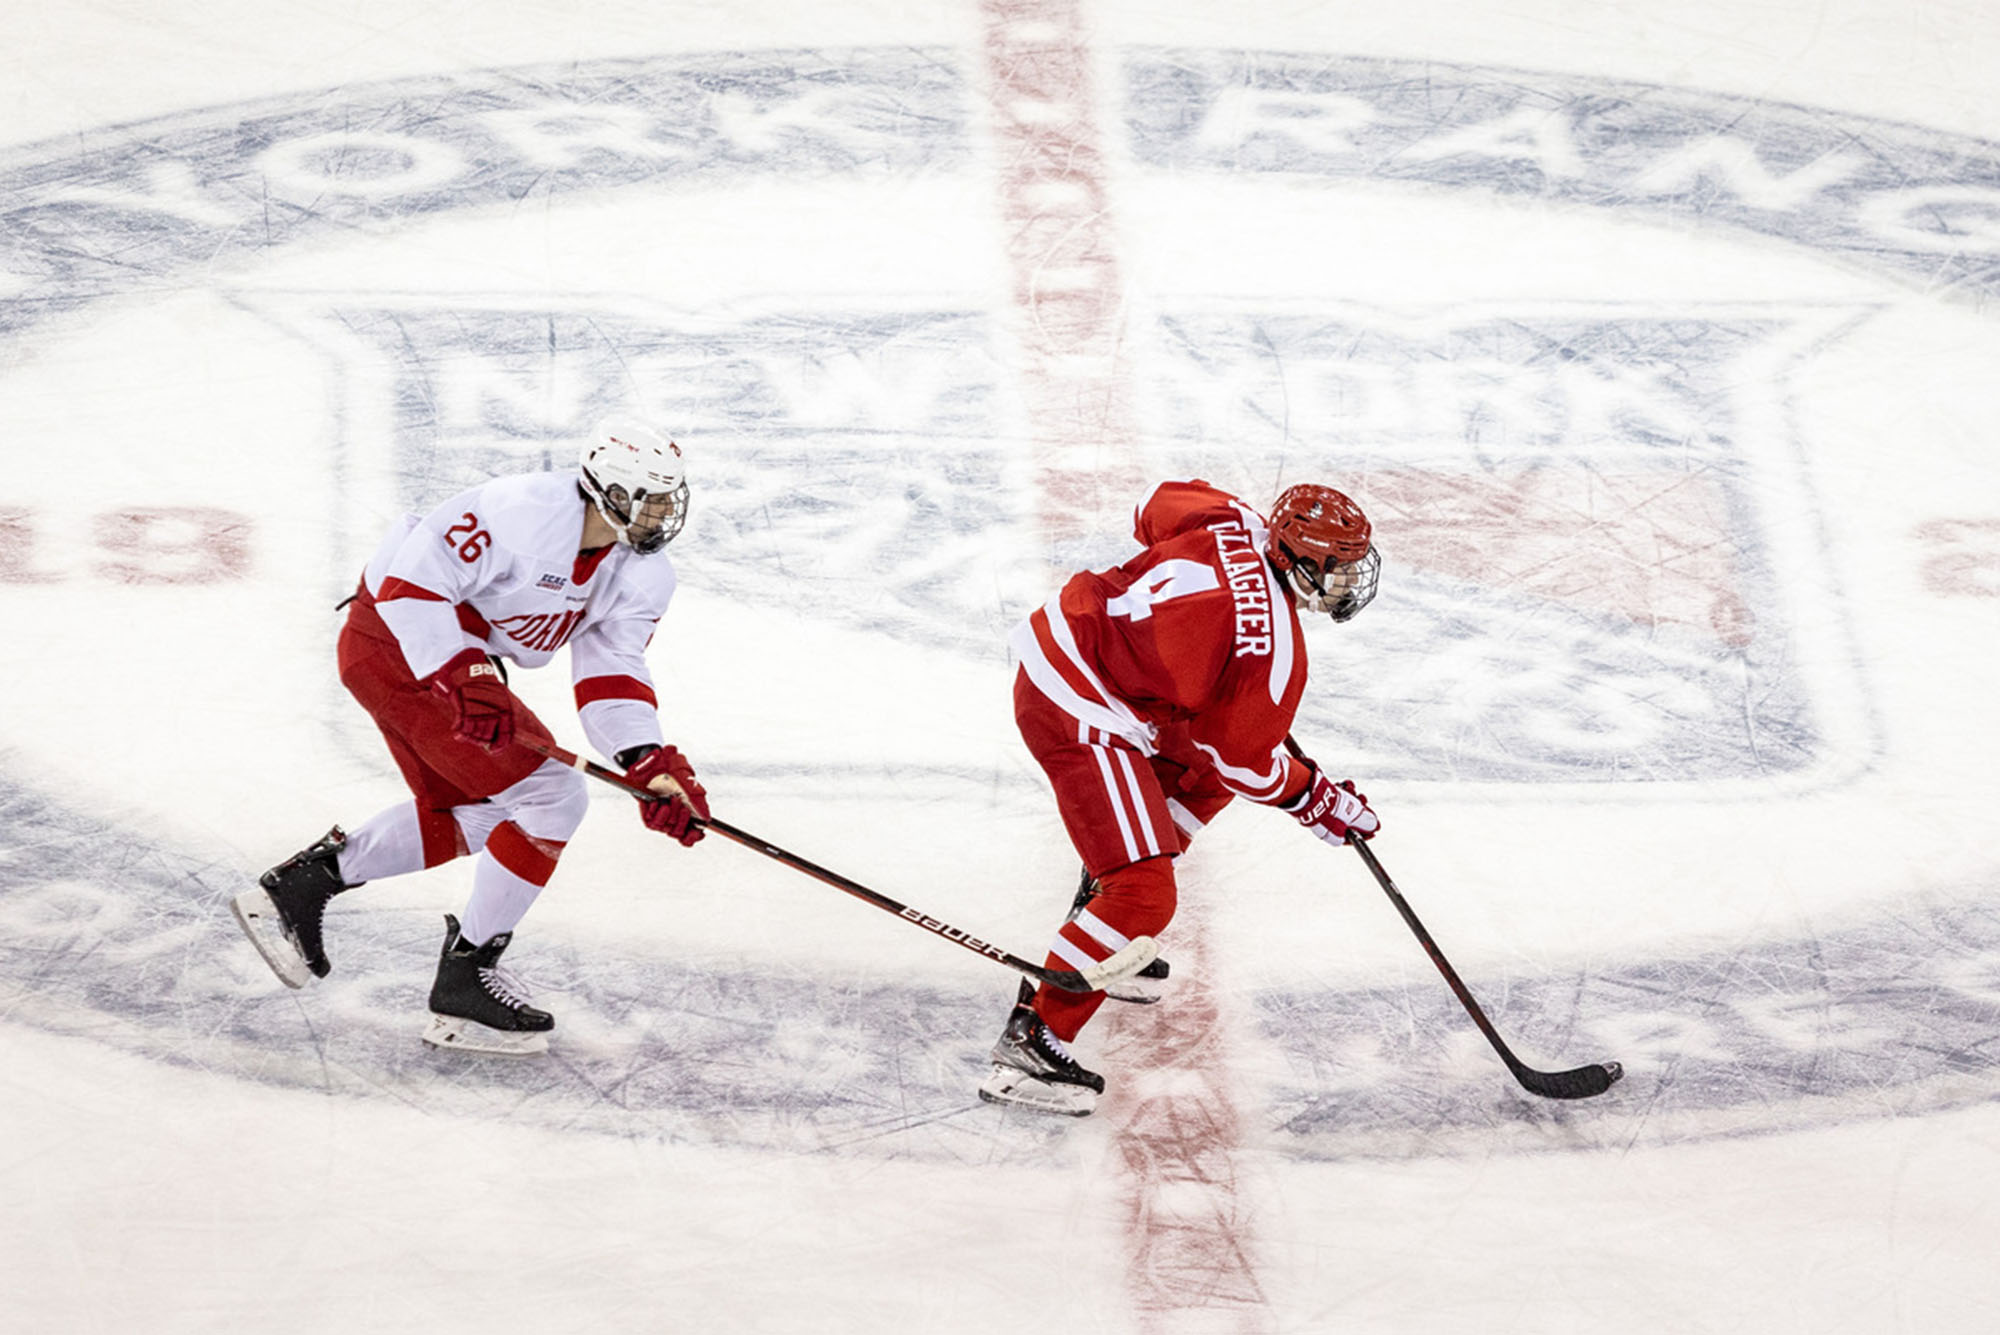 Photo: Two hockey players chase each other, one has the puck in a red uniform and the other is wearing white. They are near center ice at Madison Square Garden.